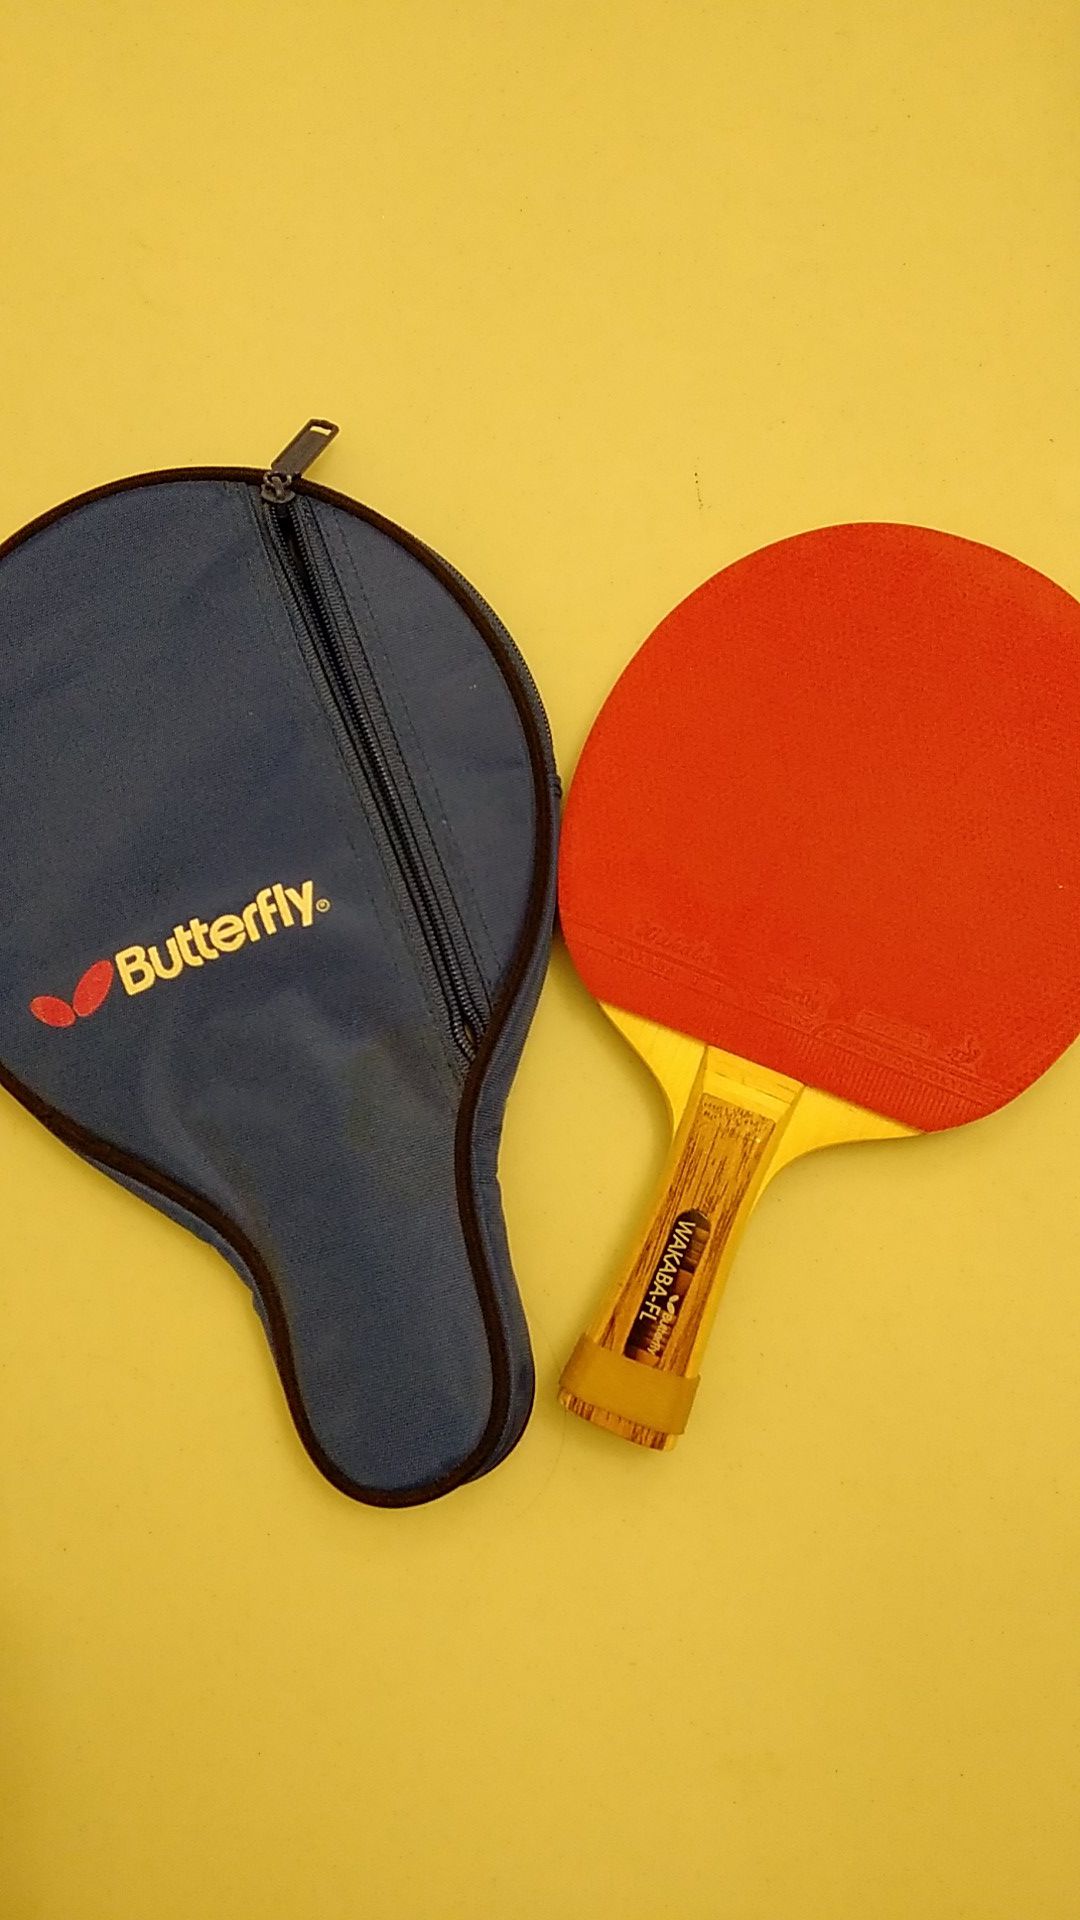 Table tennis paddle